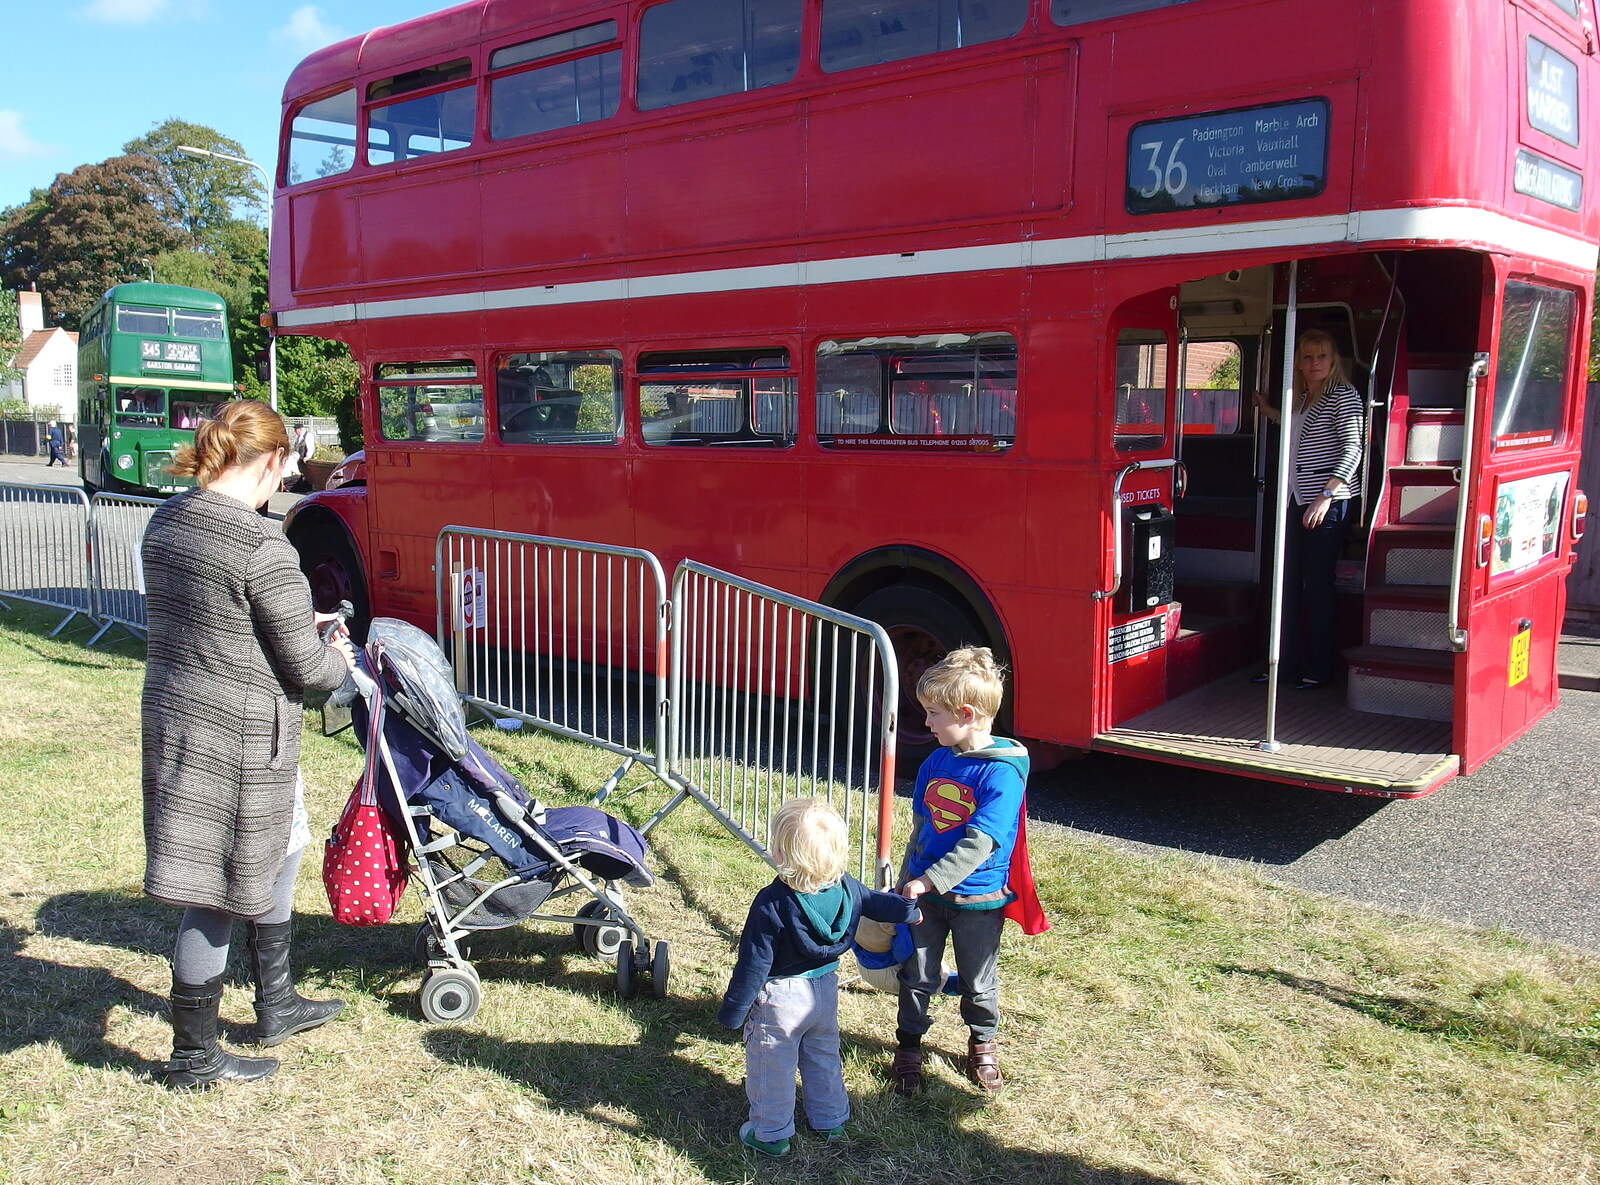 We pile off the Routemaster bus from Paul Bear's Adventures at a 1940s Steam Weekend, Holt, Norfolk - 22nd September 2013